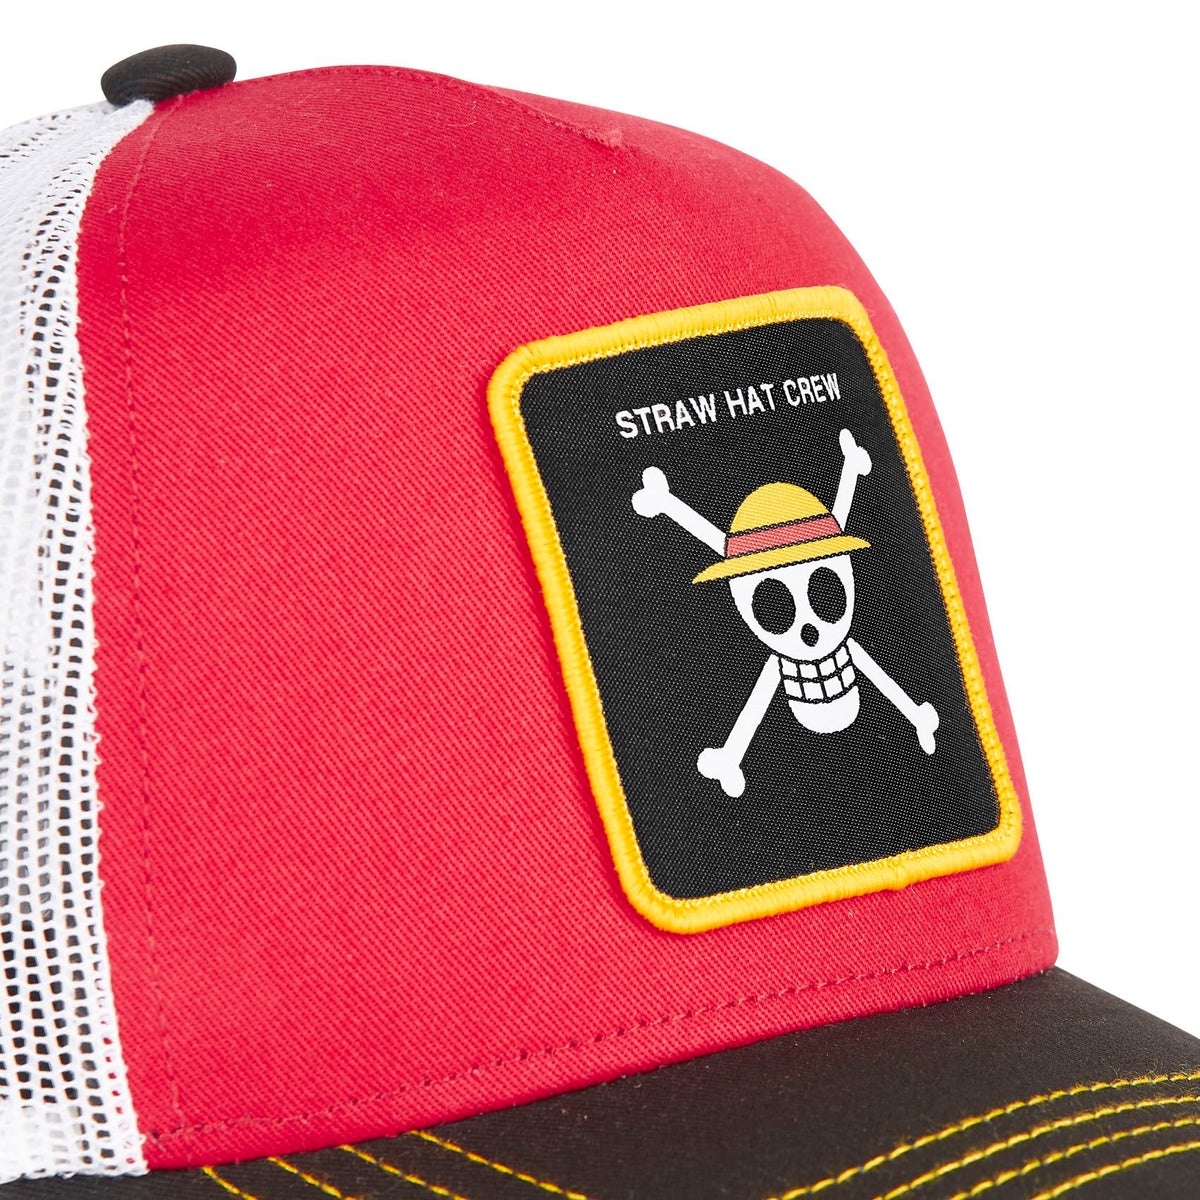 One Piece Sraw Hat Crew Red